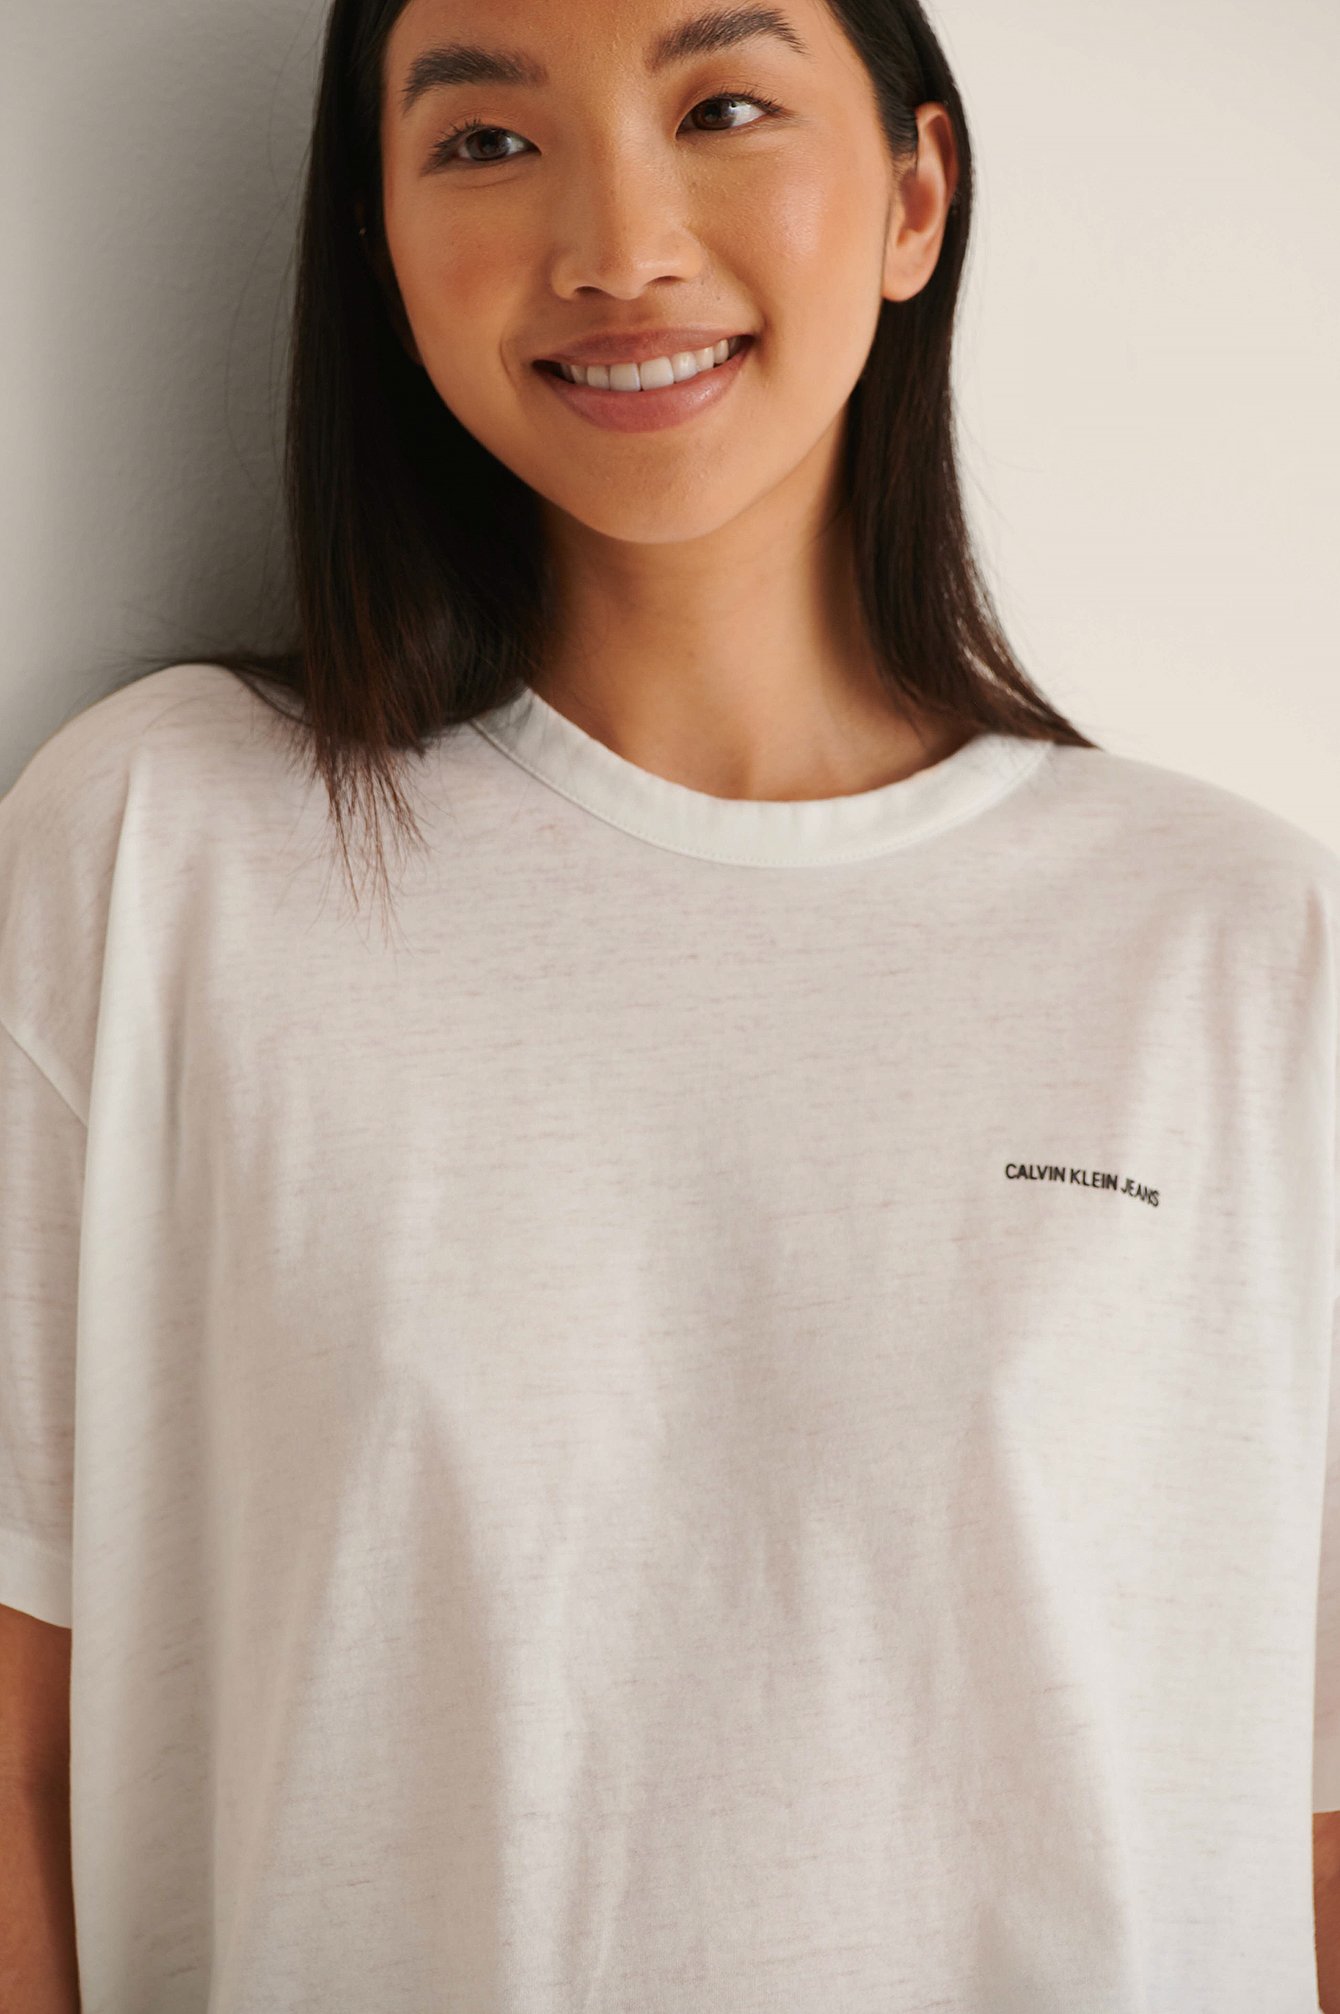 Bright White Burn Out Oversized Tee